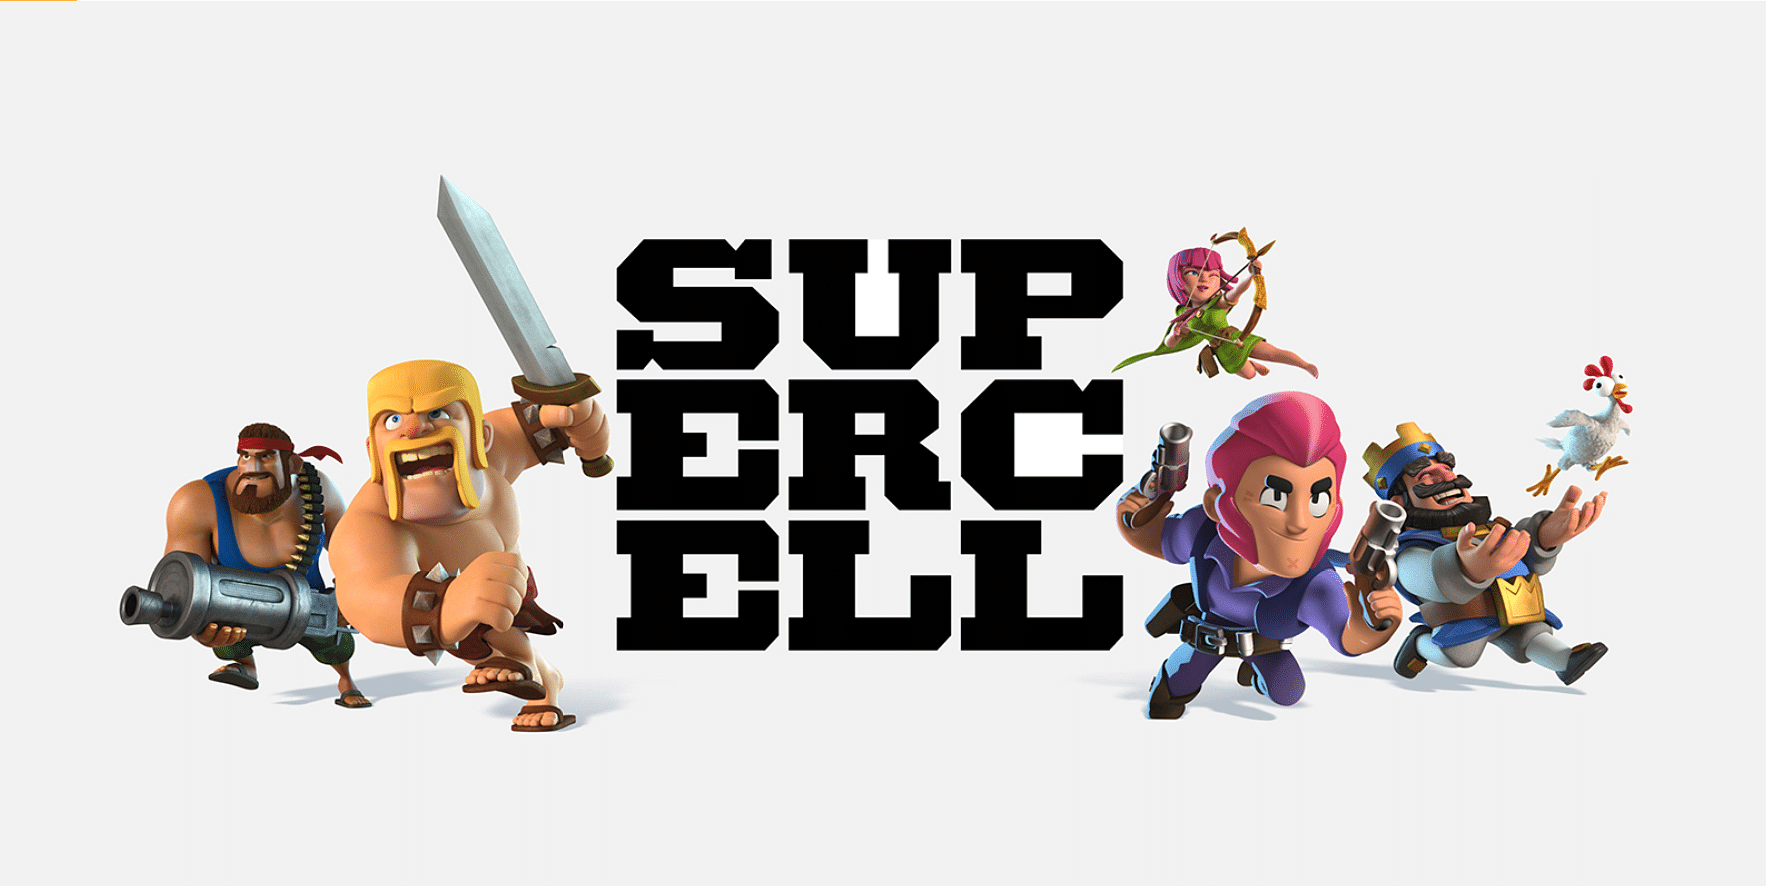 Gree Sues Supercell For 8 5 Million Dollars Find Out Why The Sportsrush - fortnite vs brawl stars vs fifa